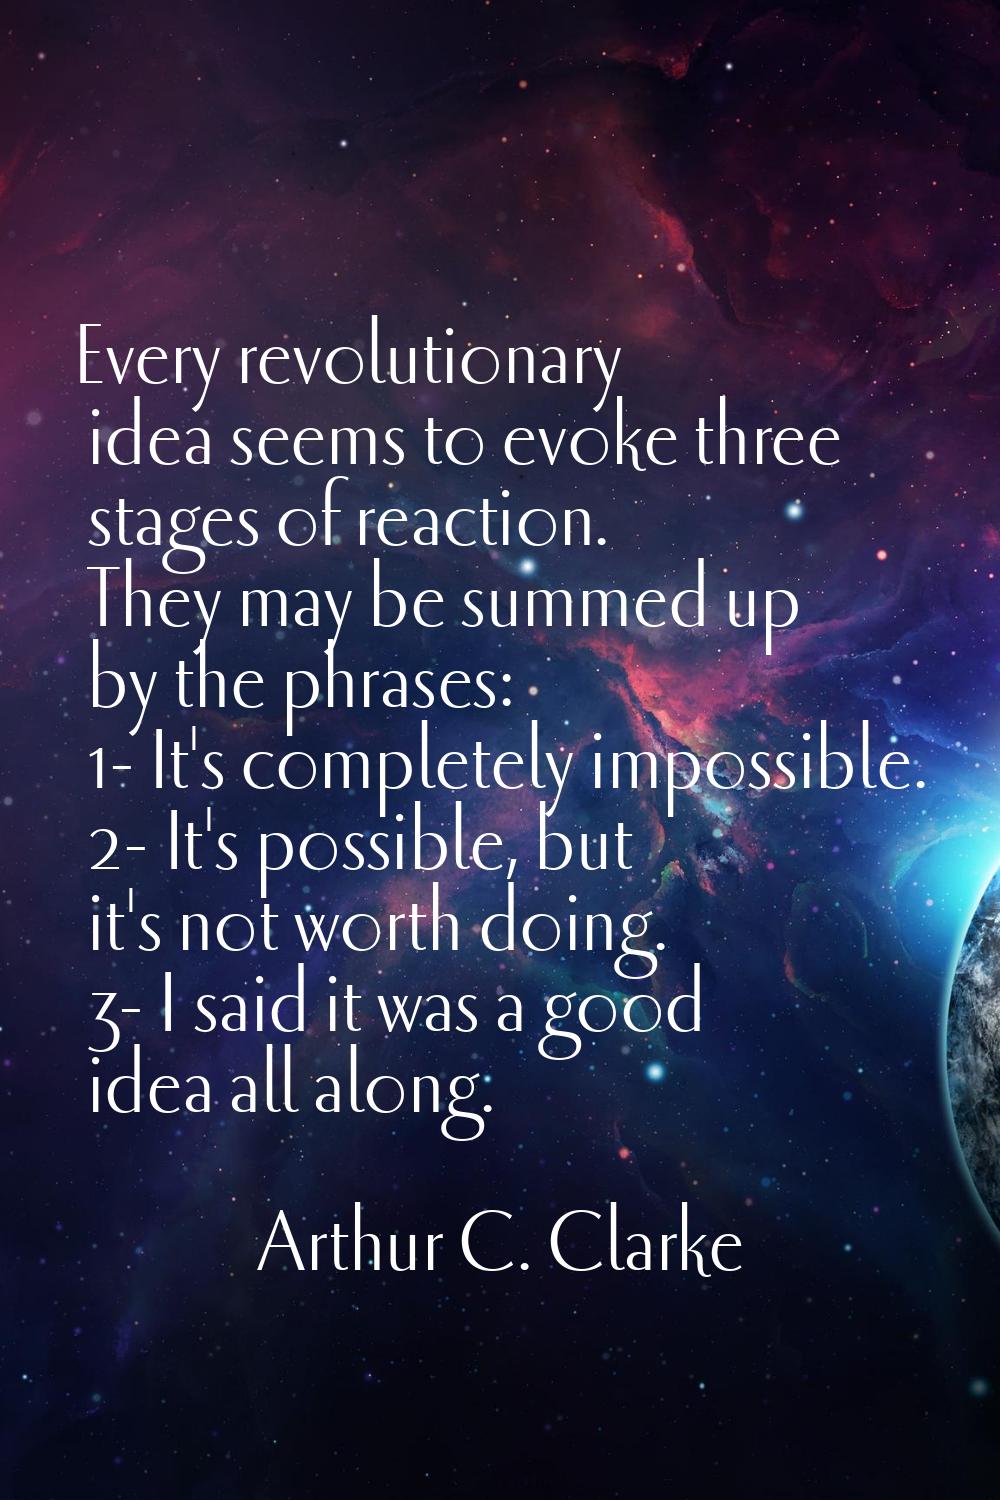 Every revolutionary idea seems to evoke three stages of reaction. They may be summed up by the phra